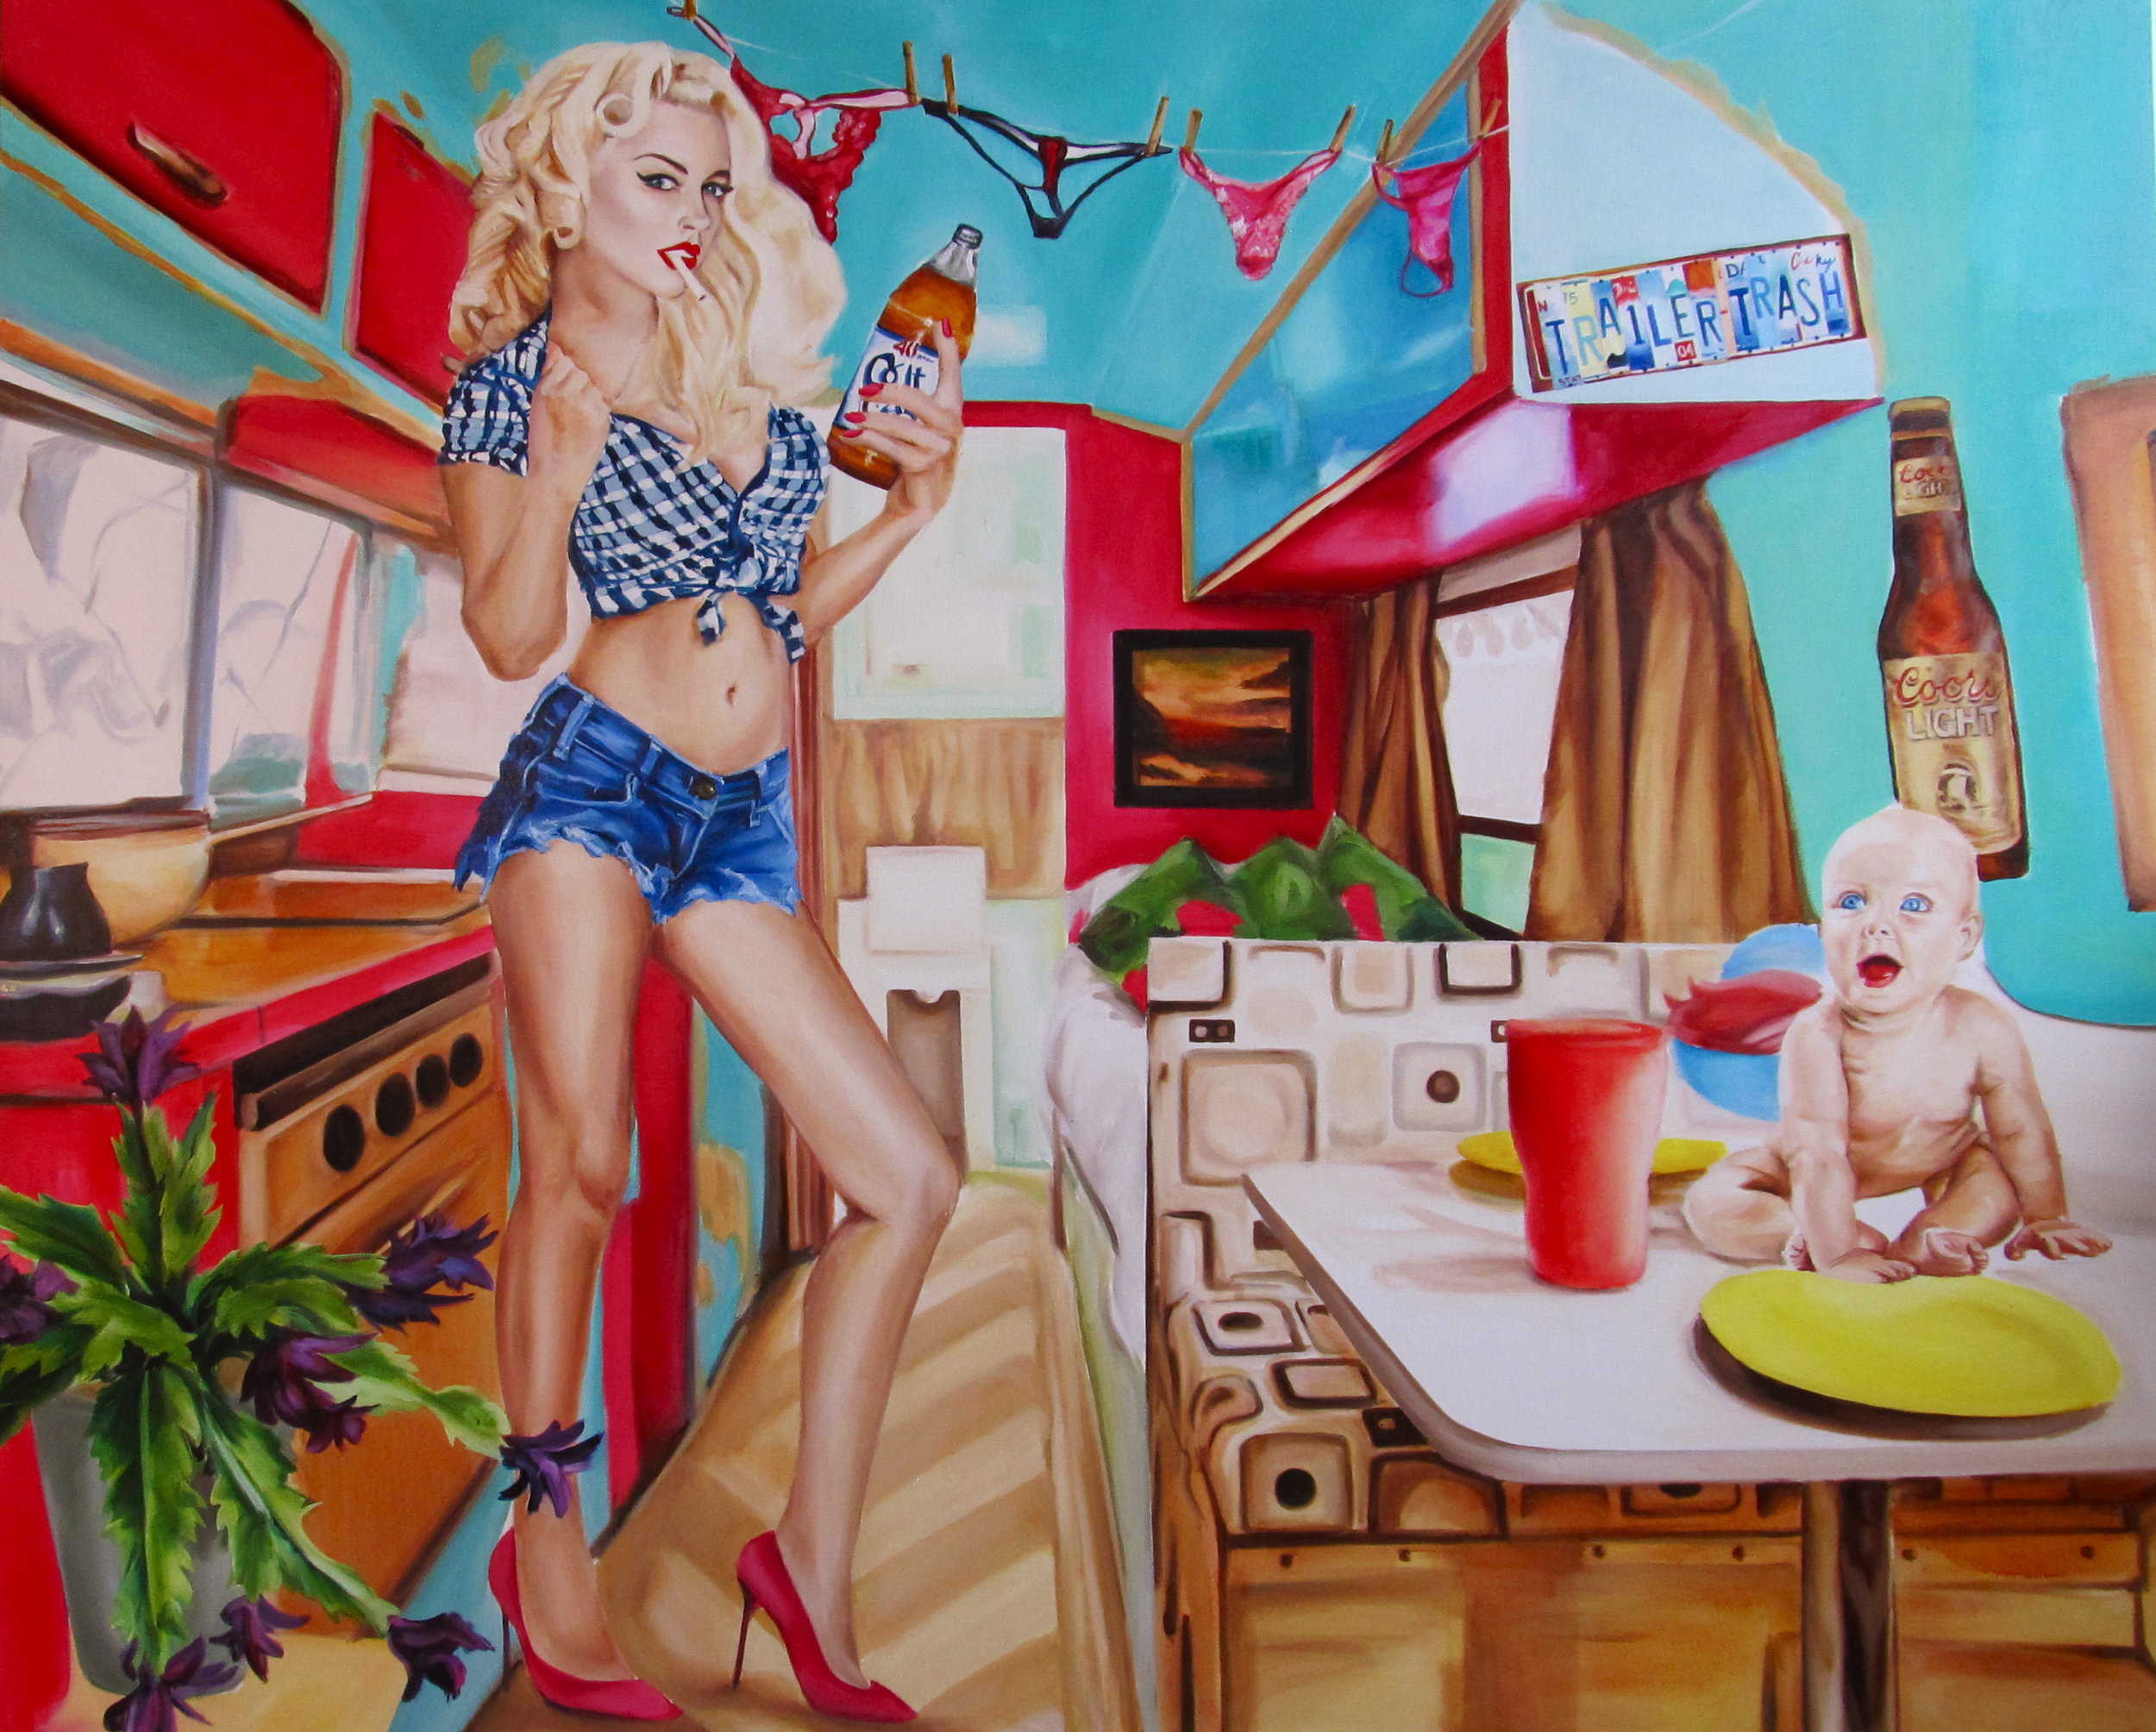  Cindy Right ain’t that bright   60x48” oil on canvas, mounted on archival wood panel  